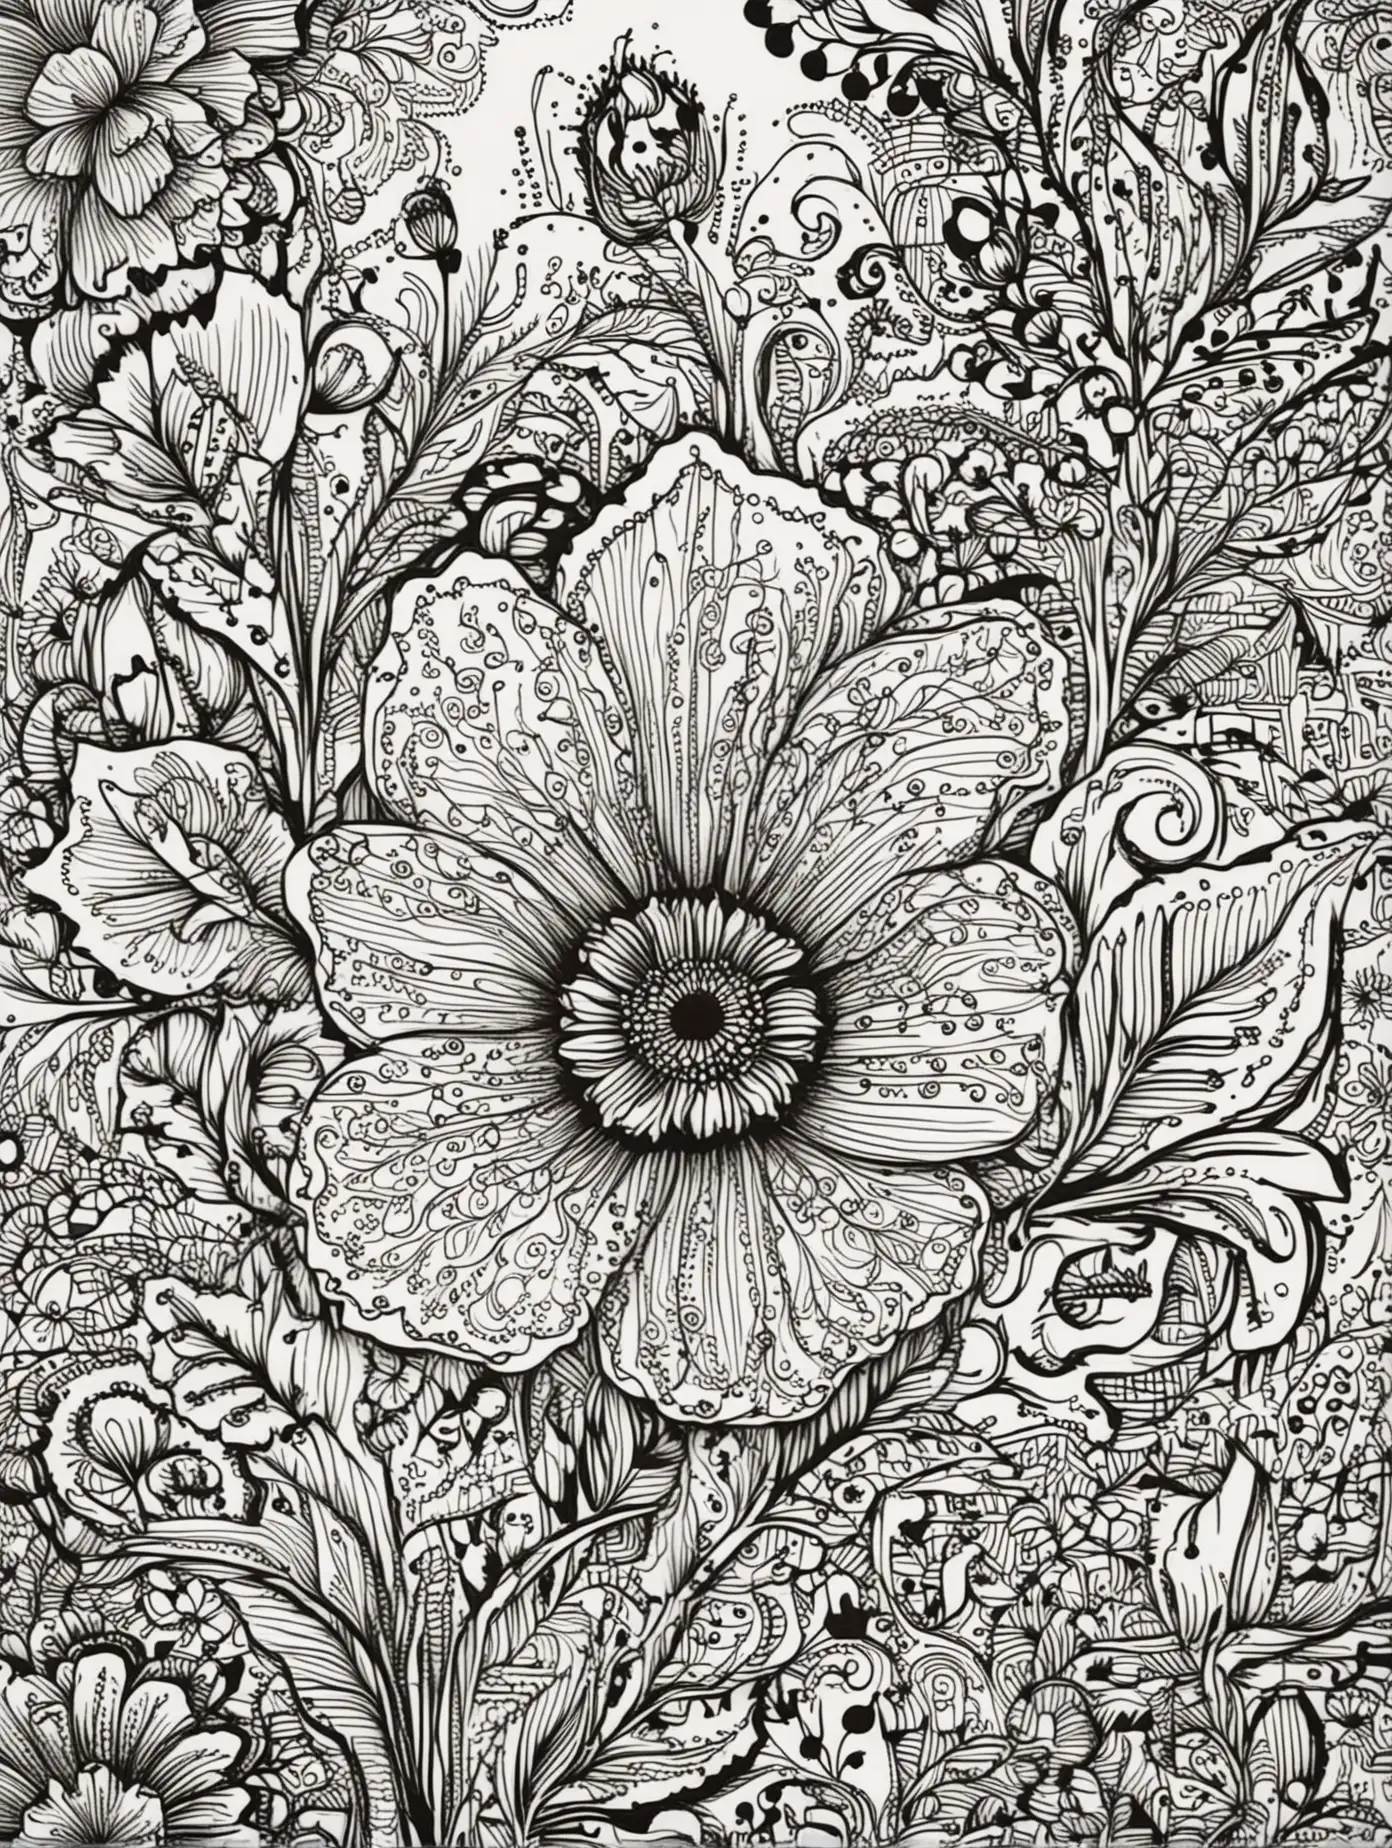 henna patterns , simple draw, no colors, poppy flower background